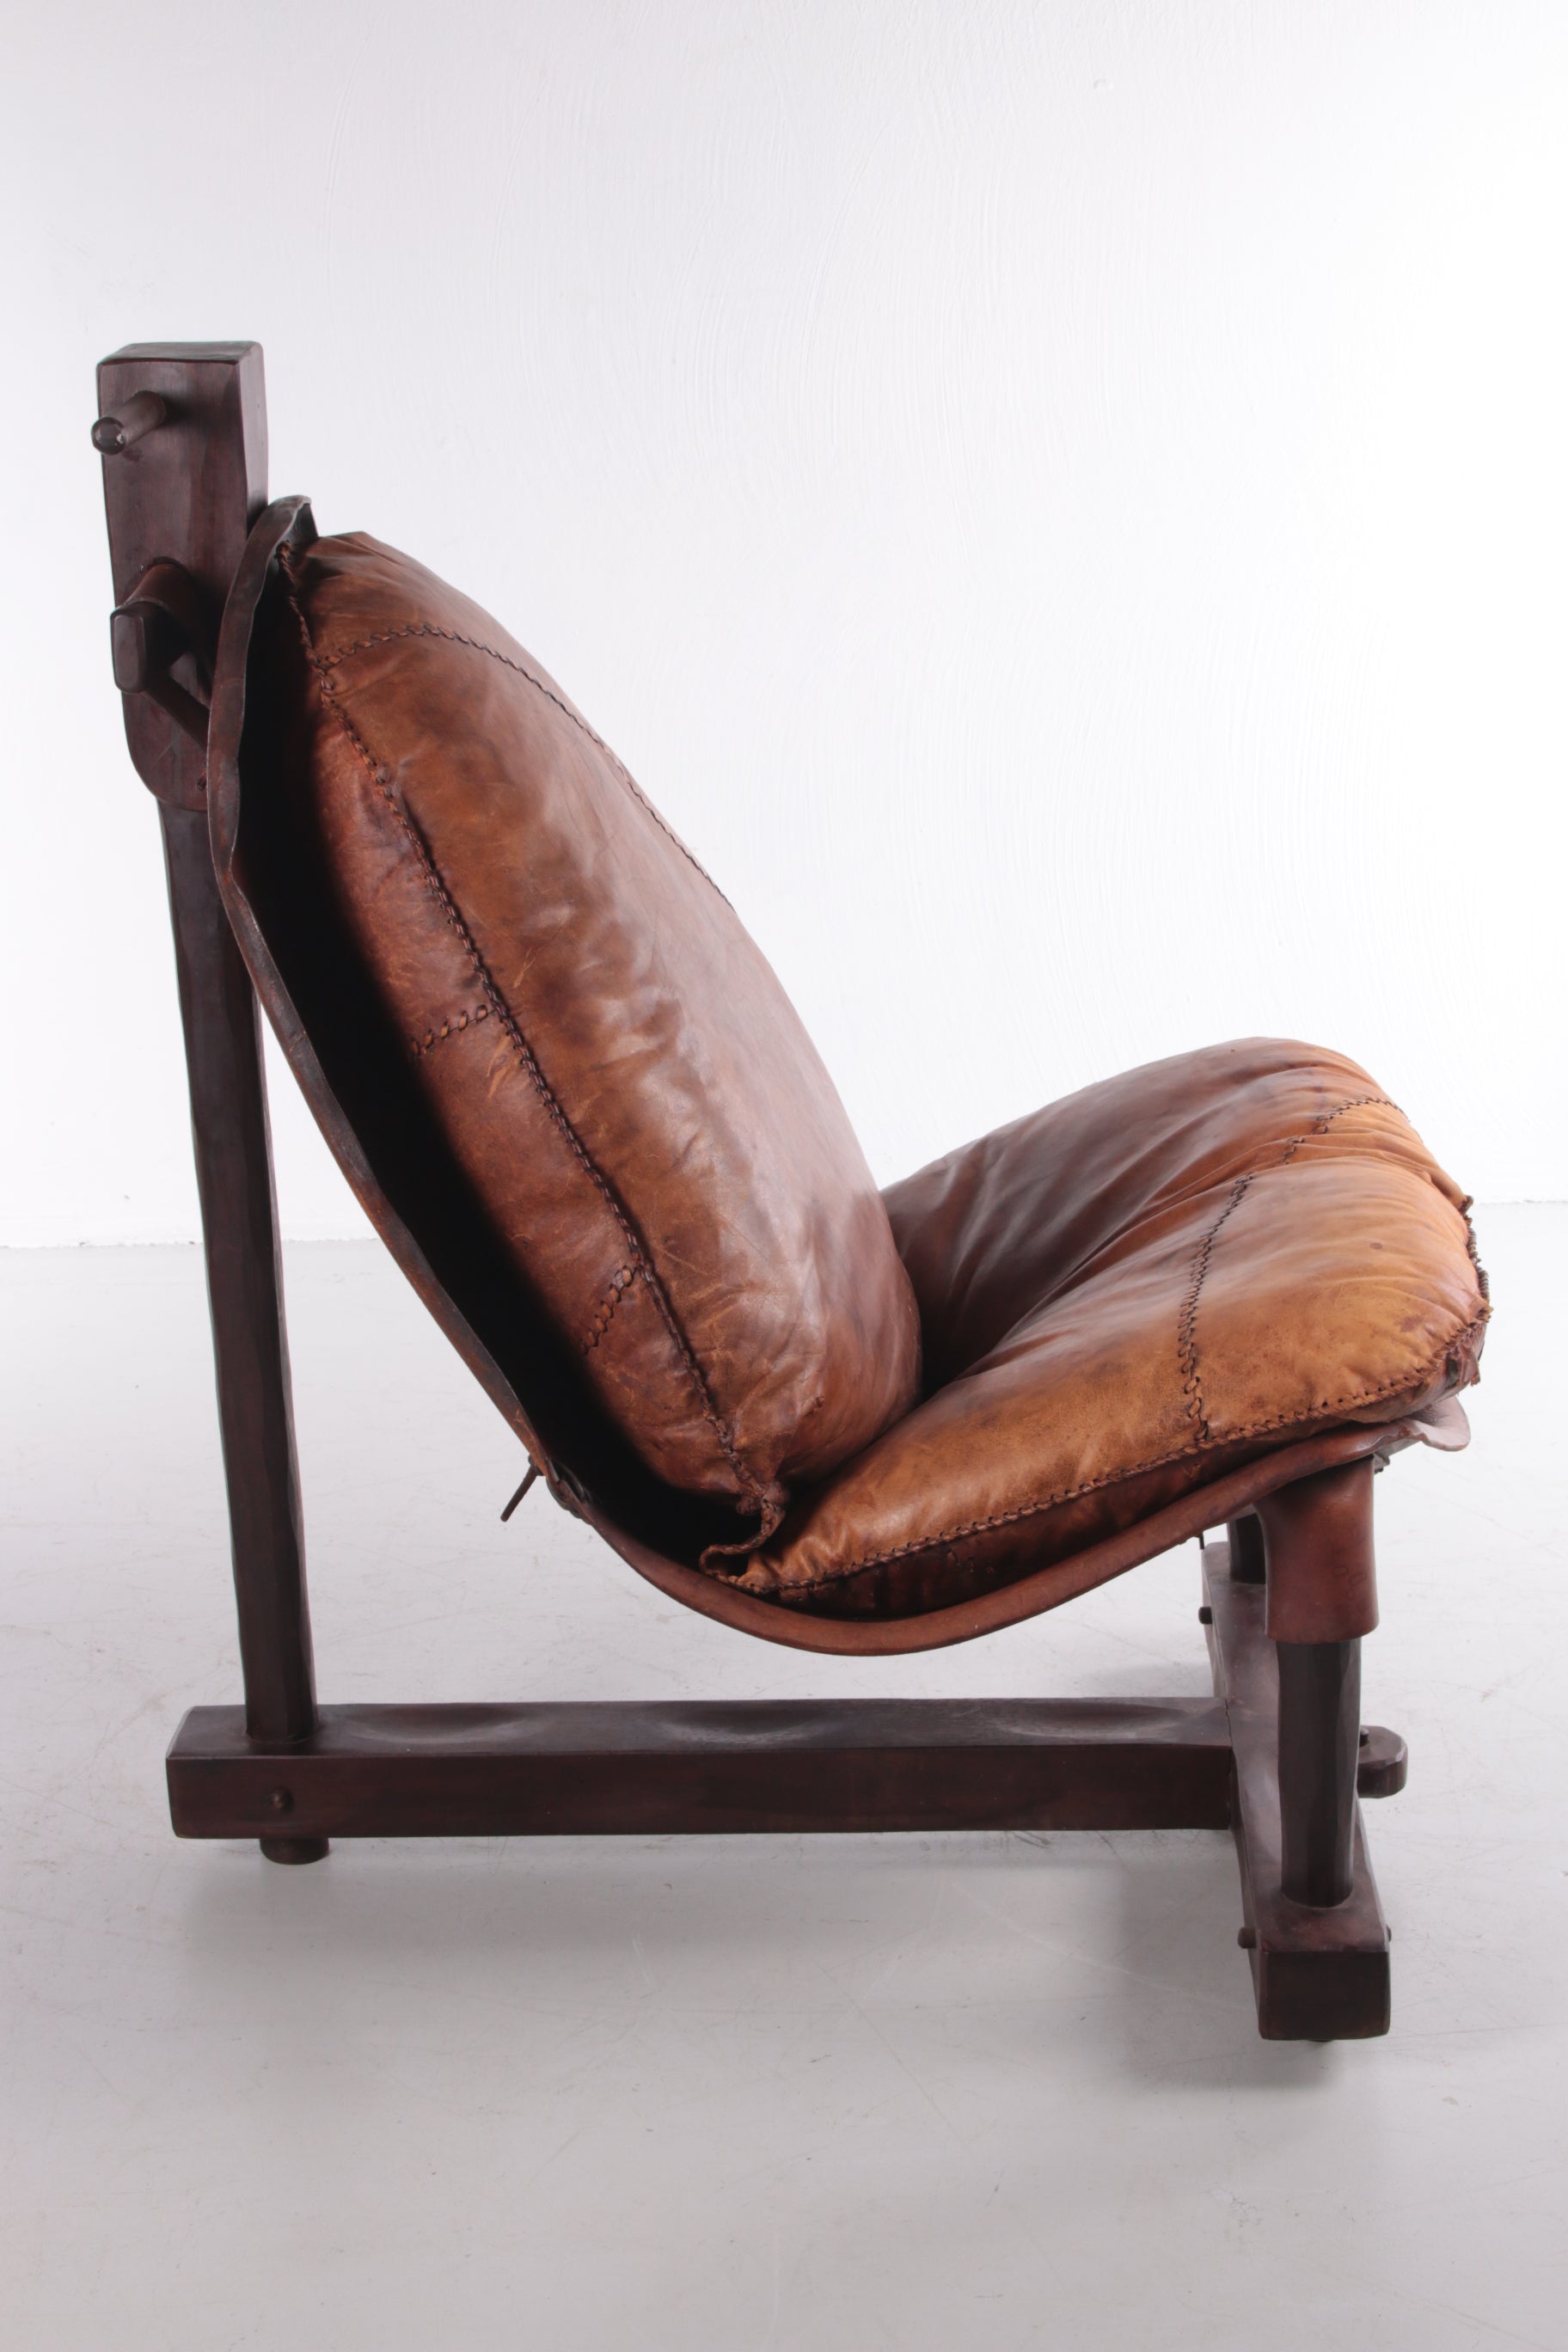 Brazilian Patched Leather Lounge Chair,1960s zijkant